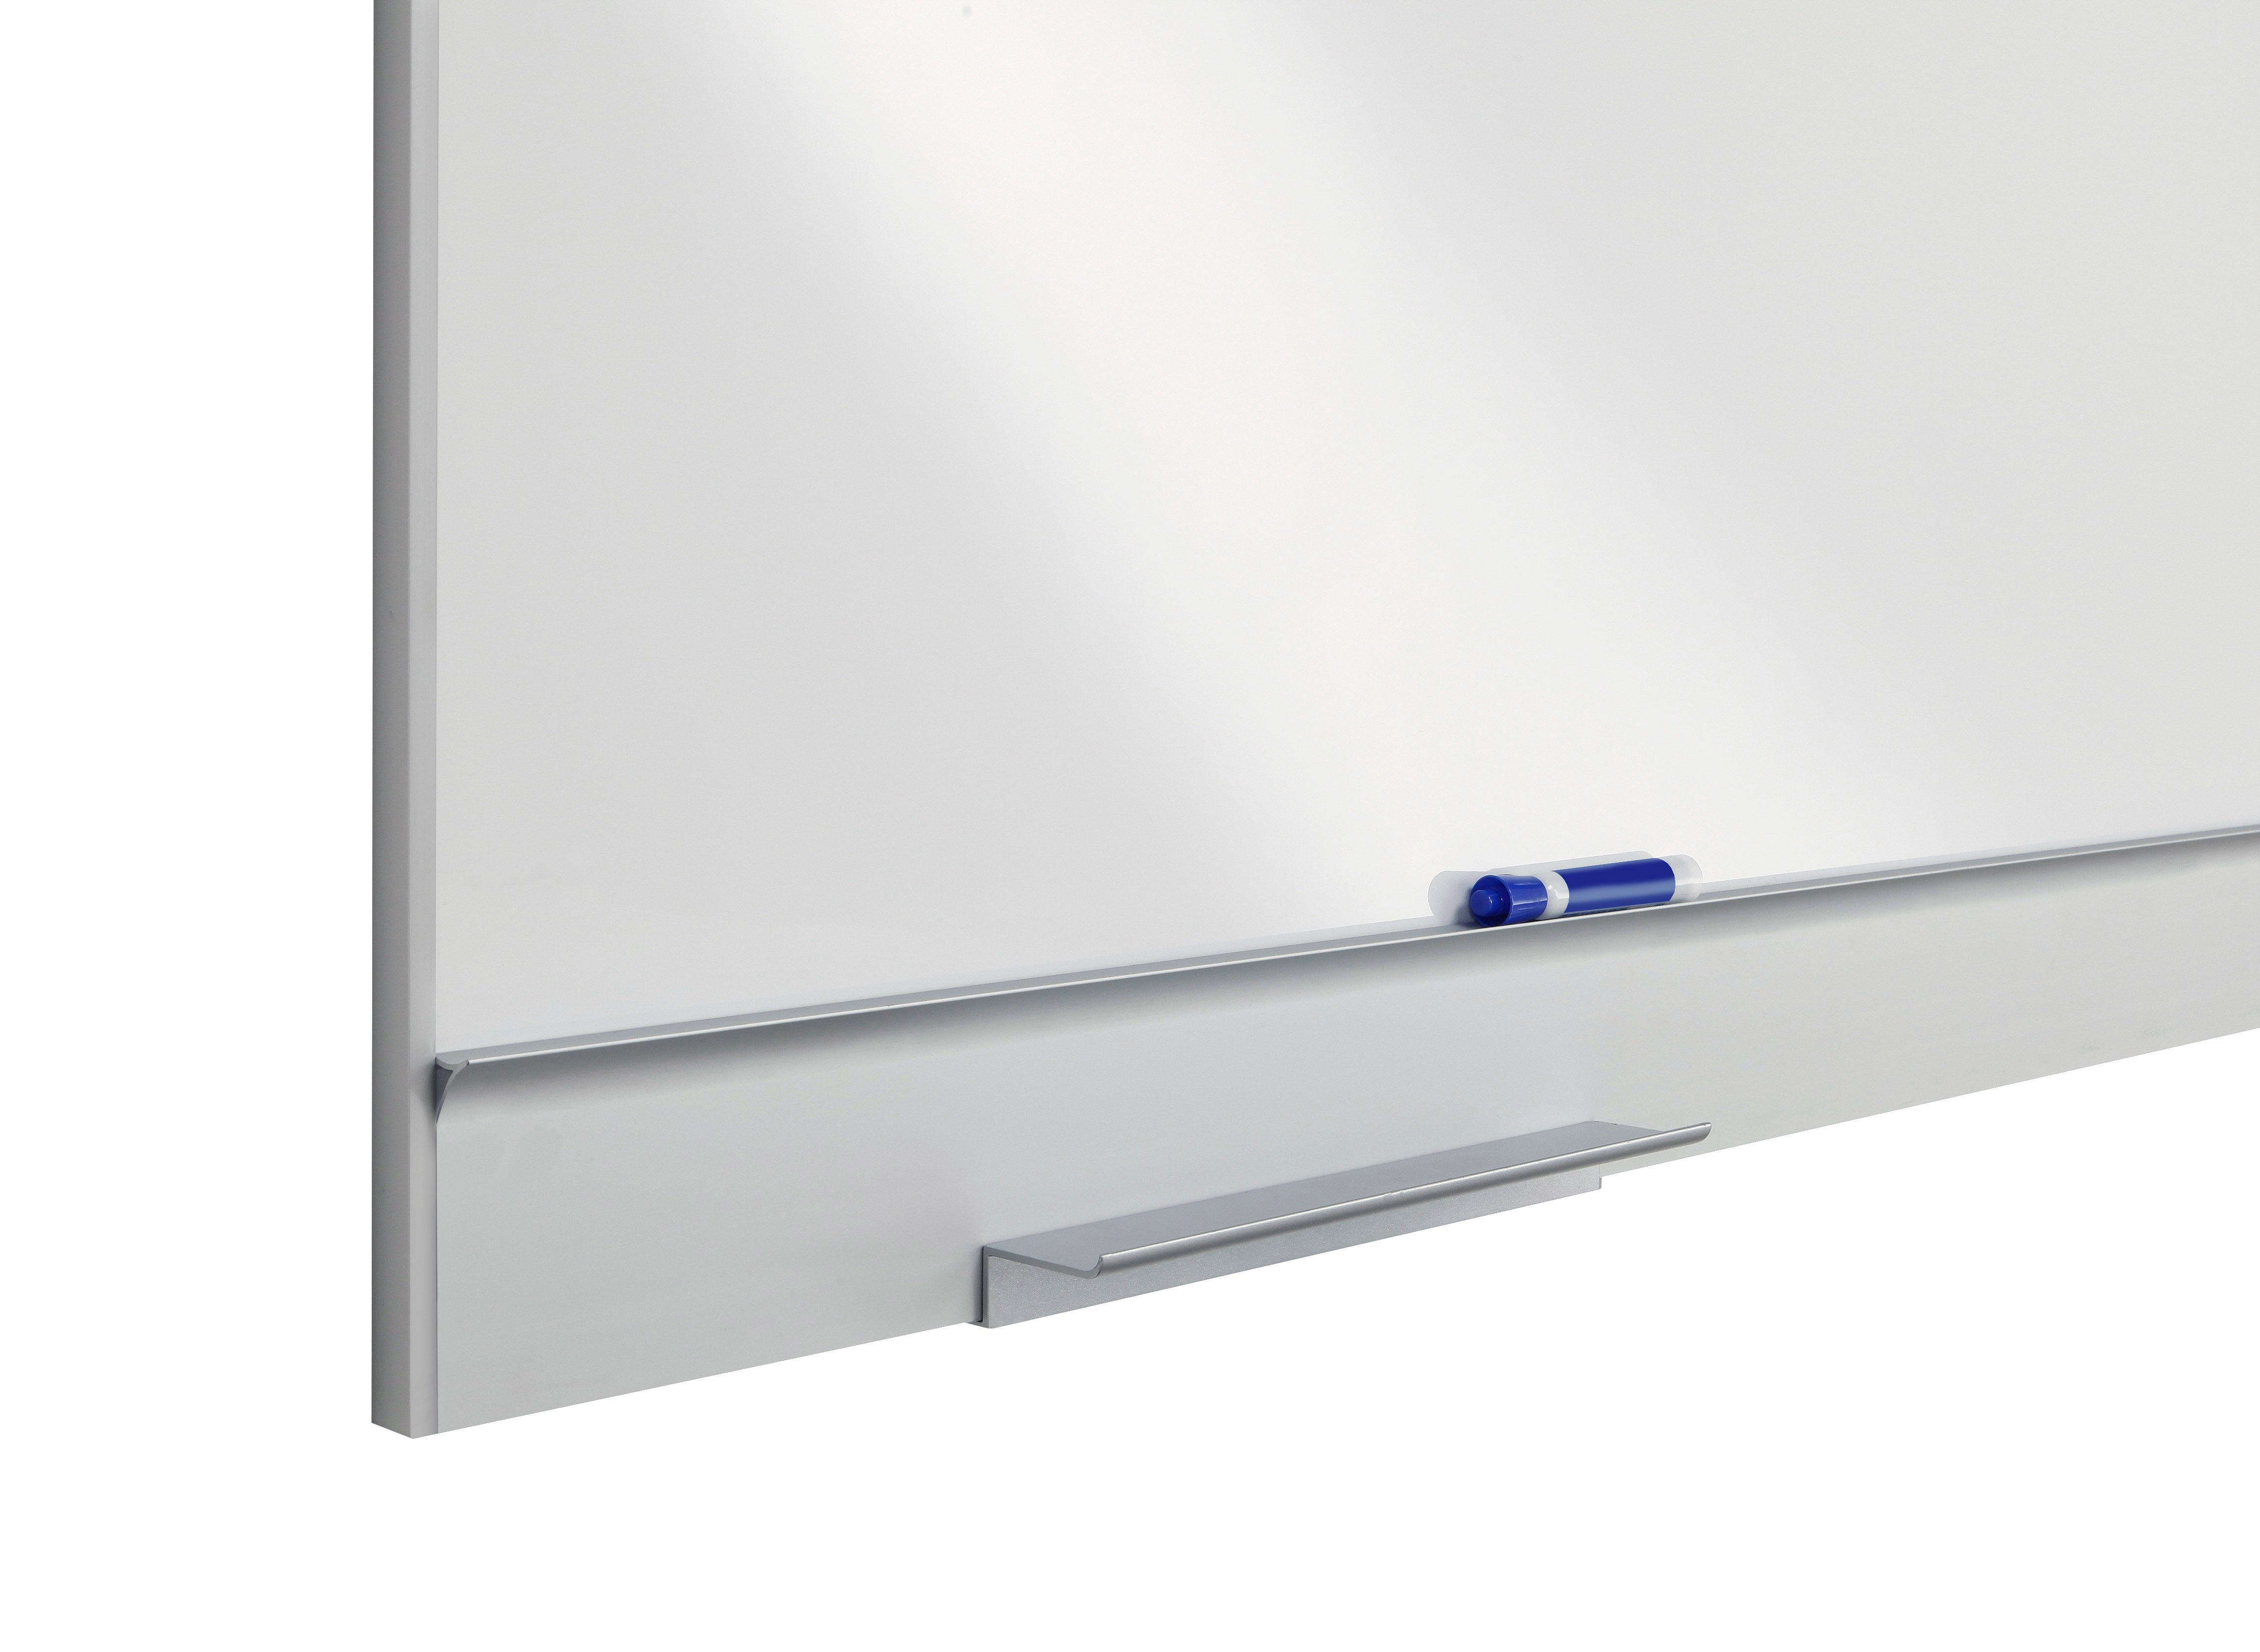 Iceberg Polarity Magnetic Presentation Flipchart Easel with Dry erase  Surface 30 2.5 ft Width x 38 3.2 ft Height White Steel Surface Metal Frame  Rectangle Floor Standing 1 Each - Office Depot